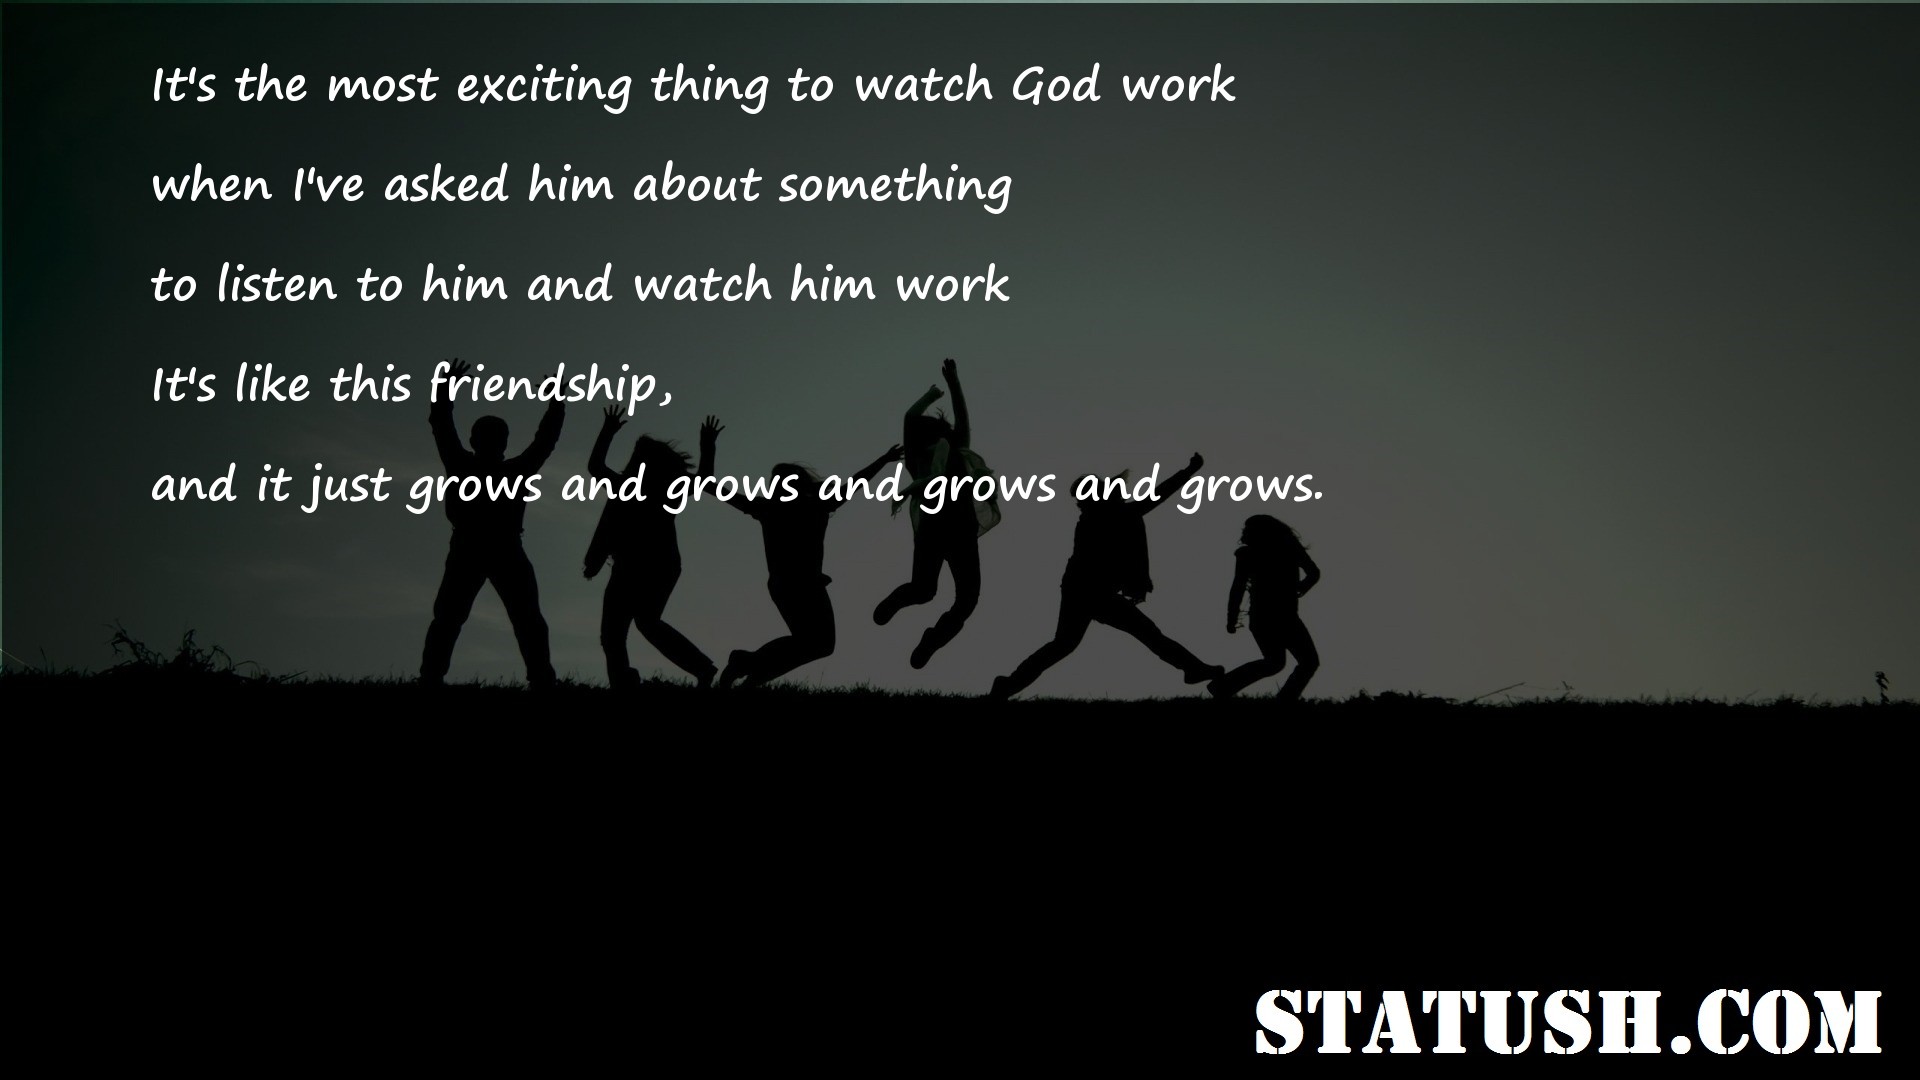 Its the most exciting thing to watch God work Friendship Quotes at statush.com